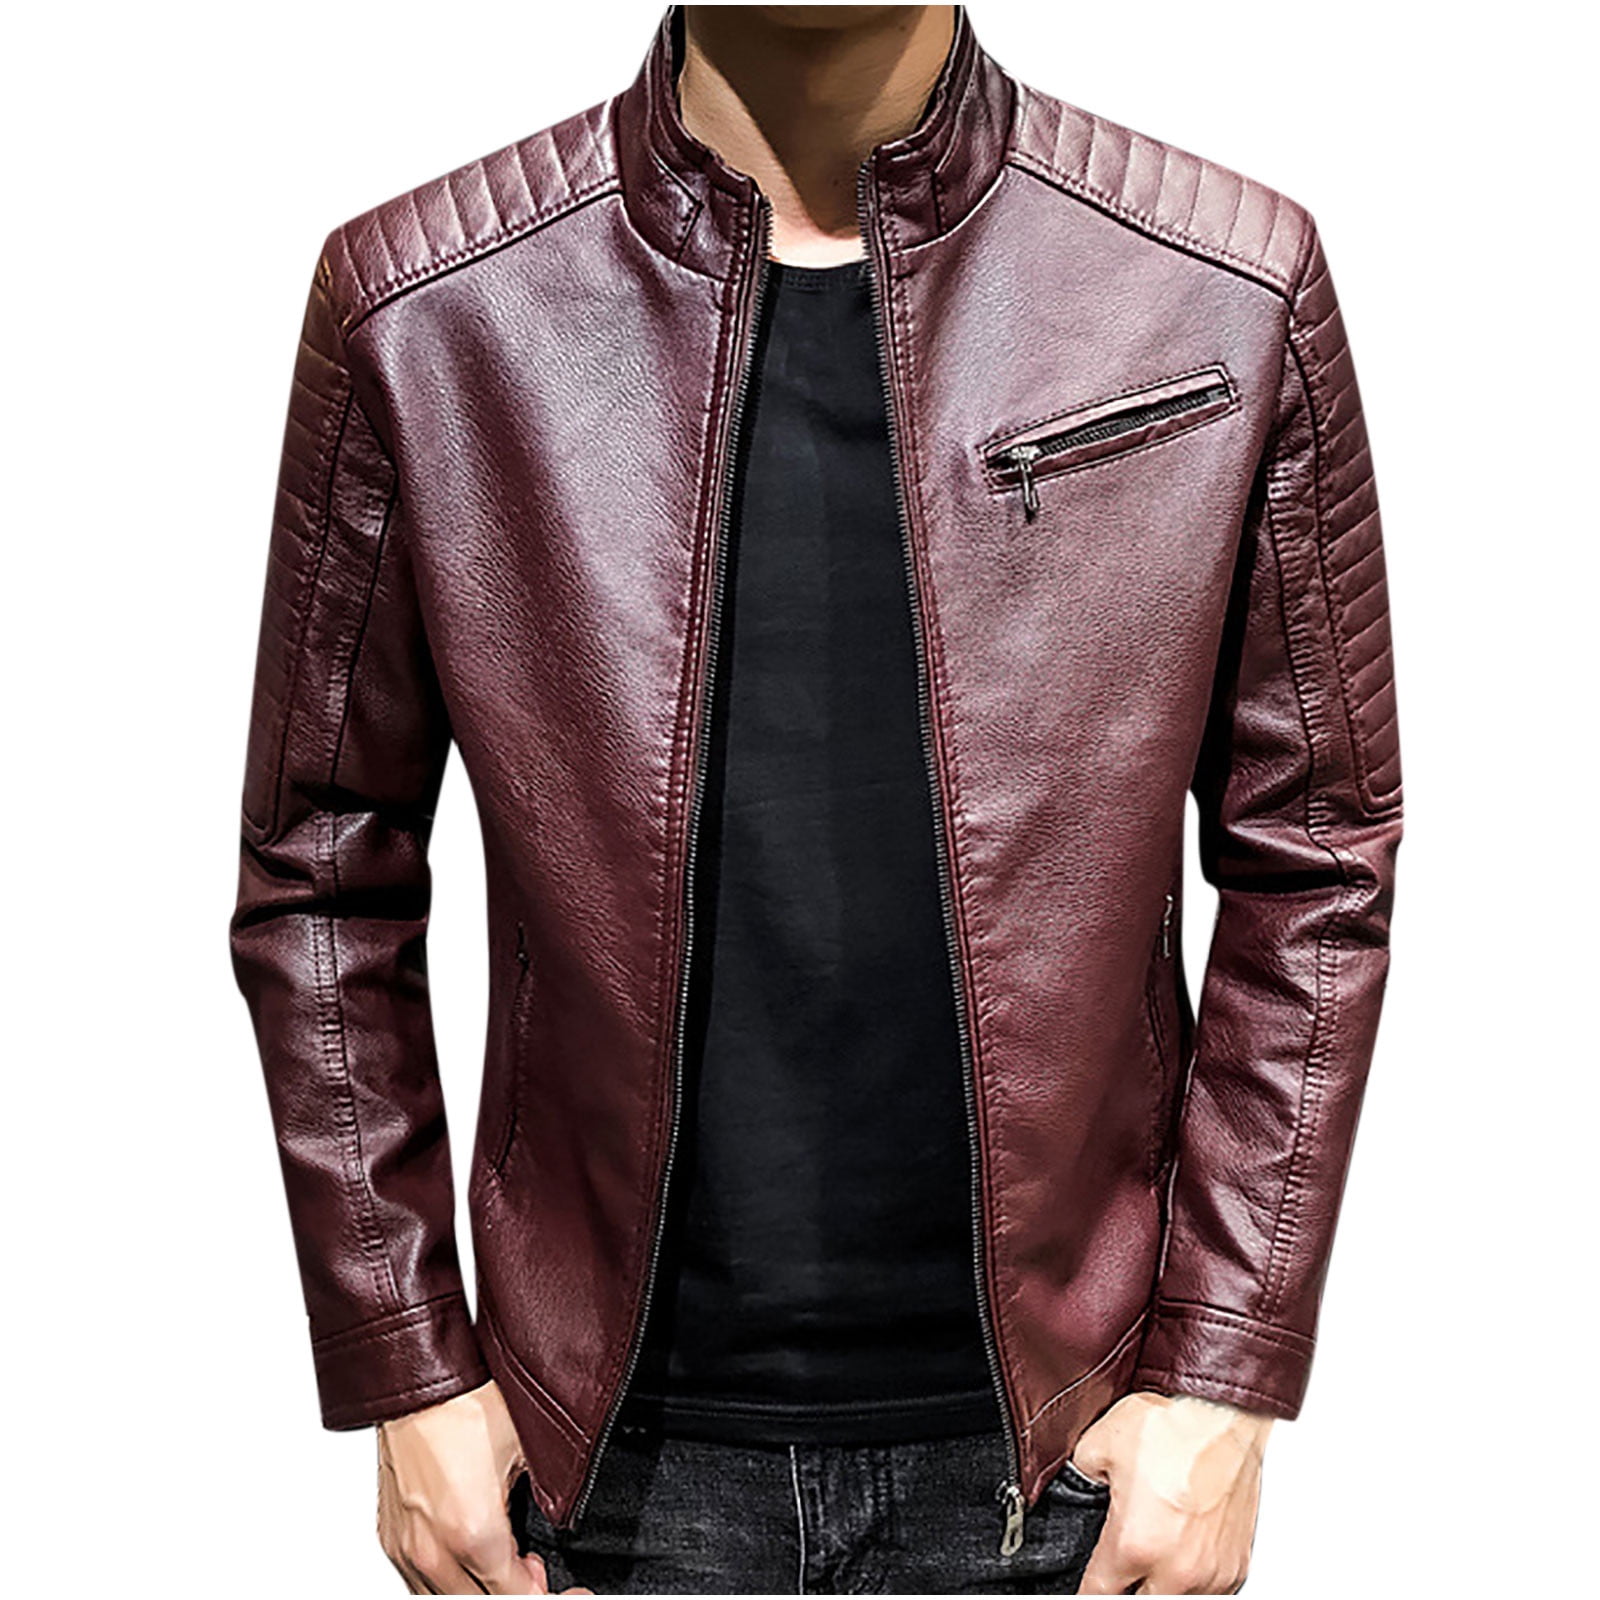 Christmas Gifts! purcolt Men's Plus Bomber Jacket, Christmas Fall Fashion Solid Collar Stand Collar Faux Leather Jacket Slim Fit Full Zipper Distressed Motorcycle Coat with Pockets - Walmart.com